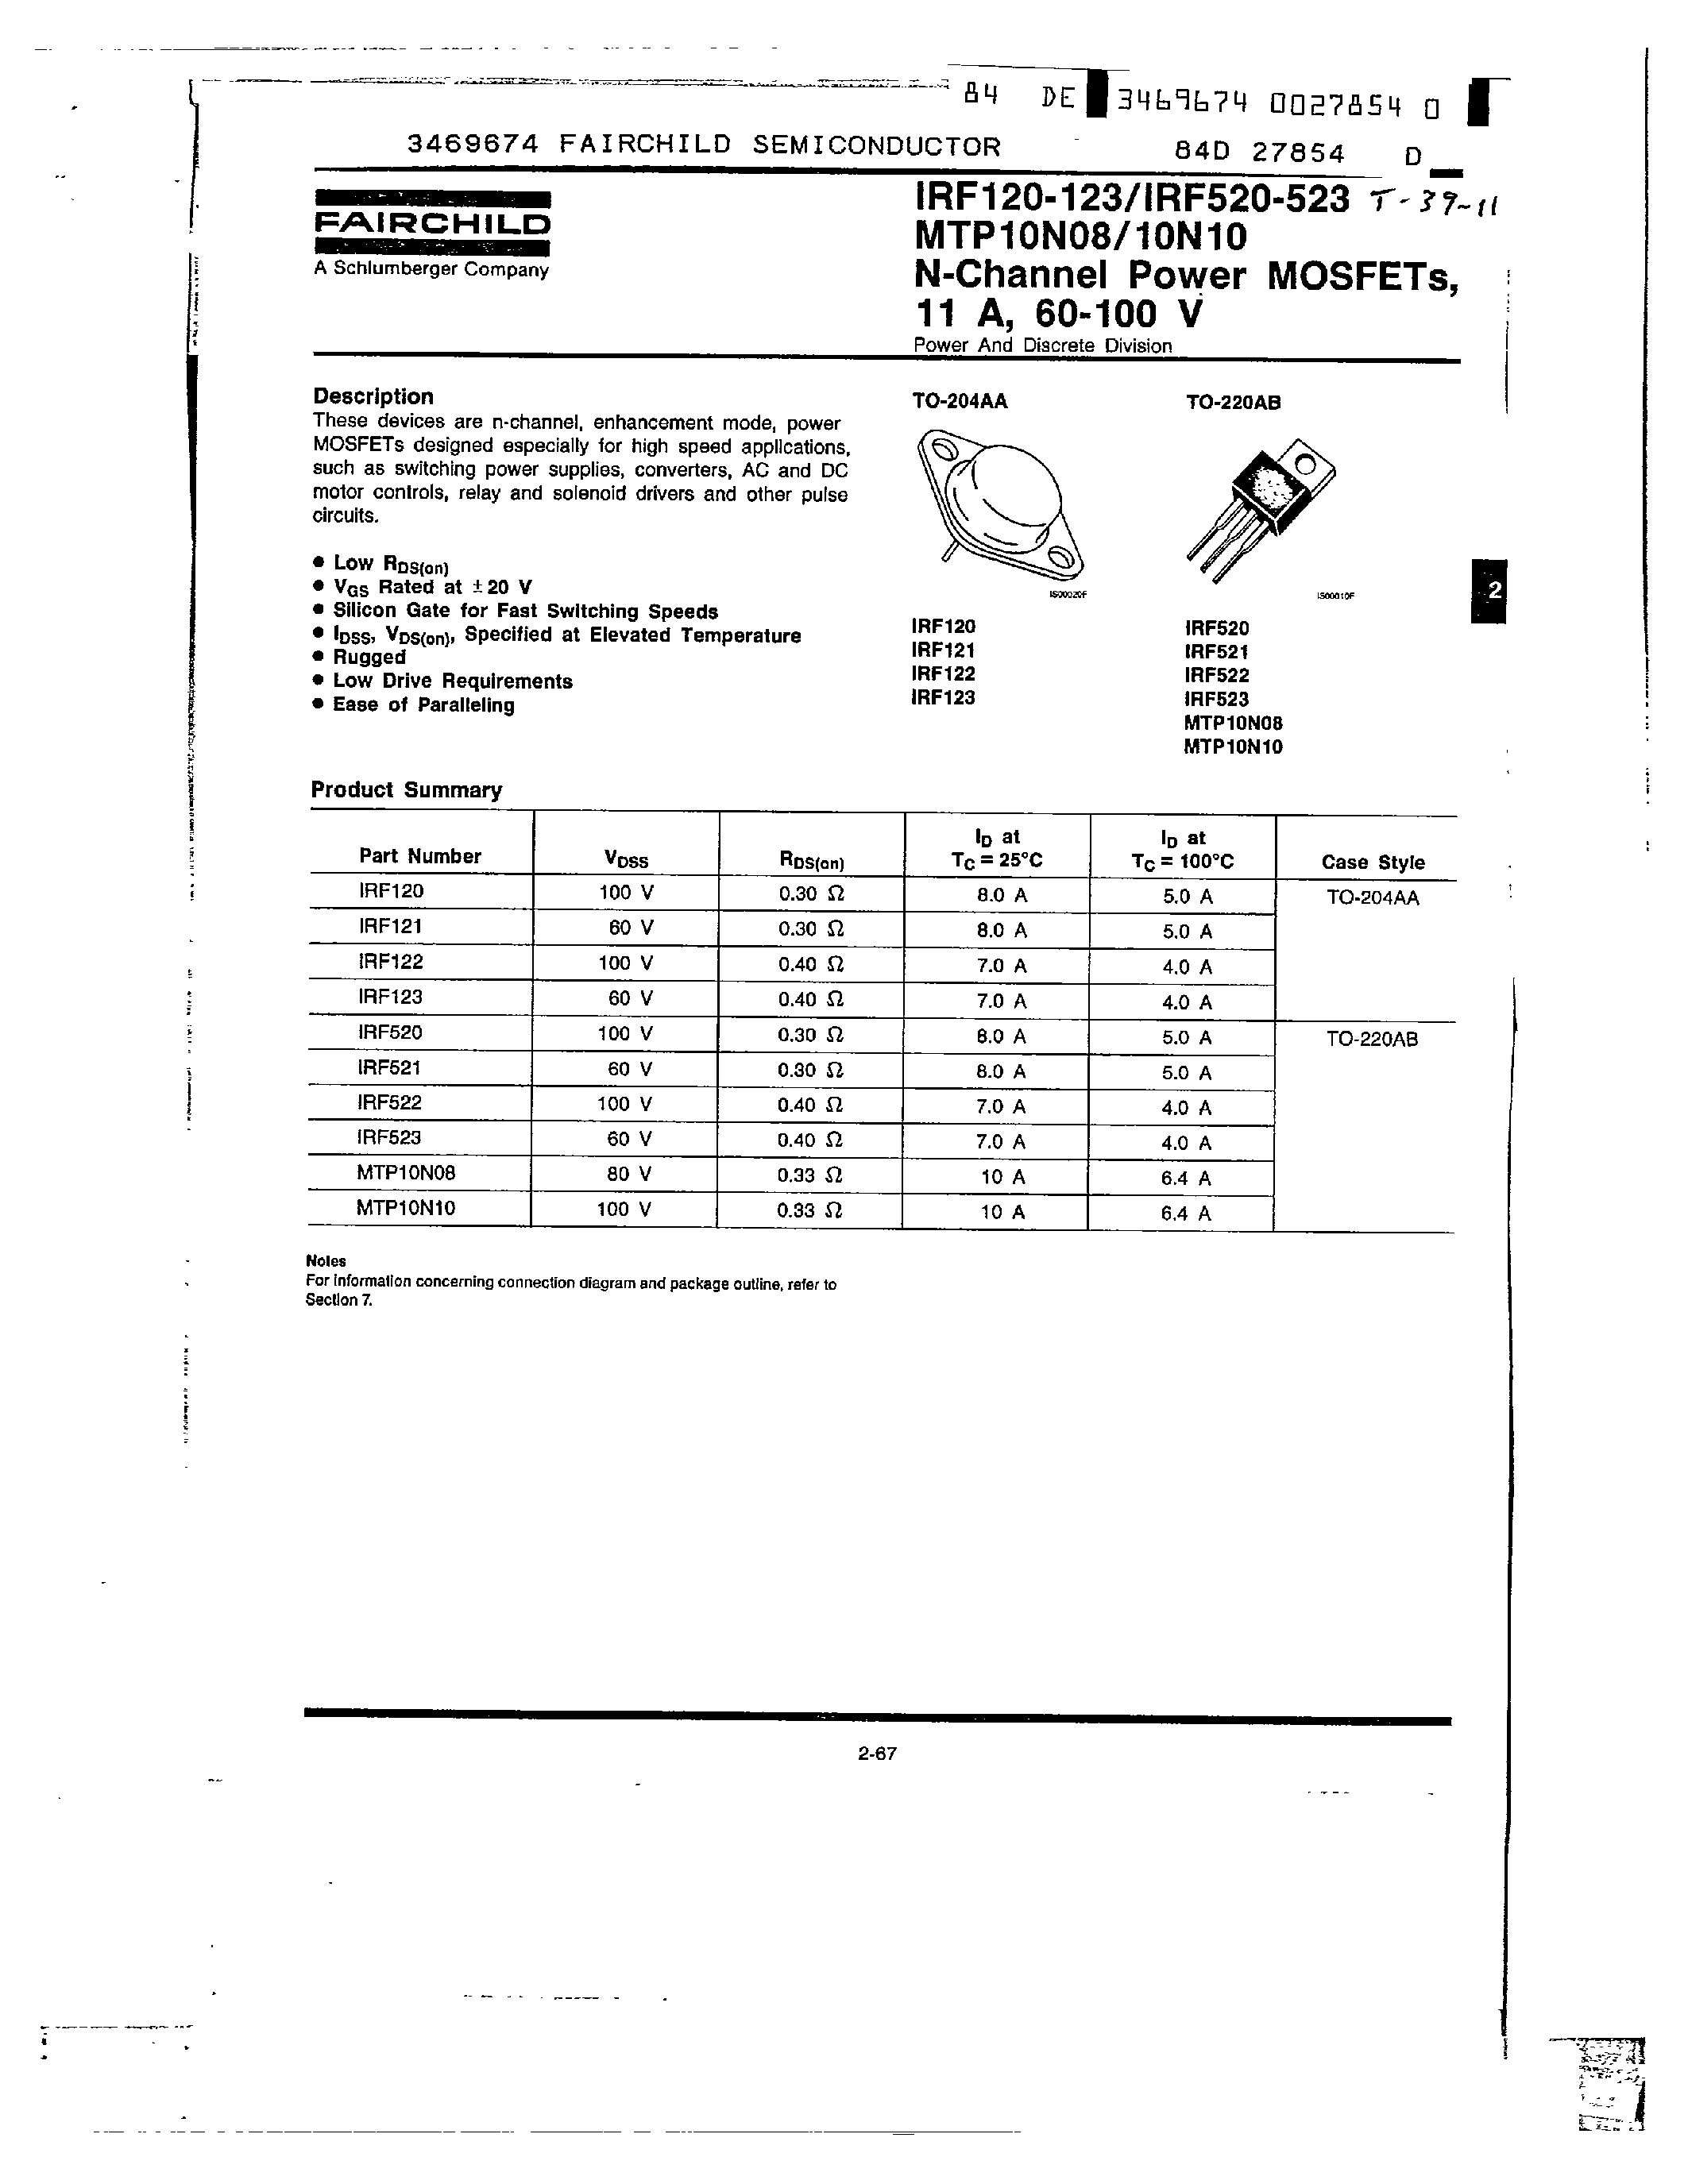 Datasheet IRF123 - N-Channel Power MOSFETs/ 11 A/ 60-100 V page 1